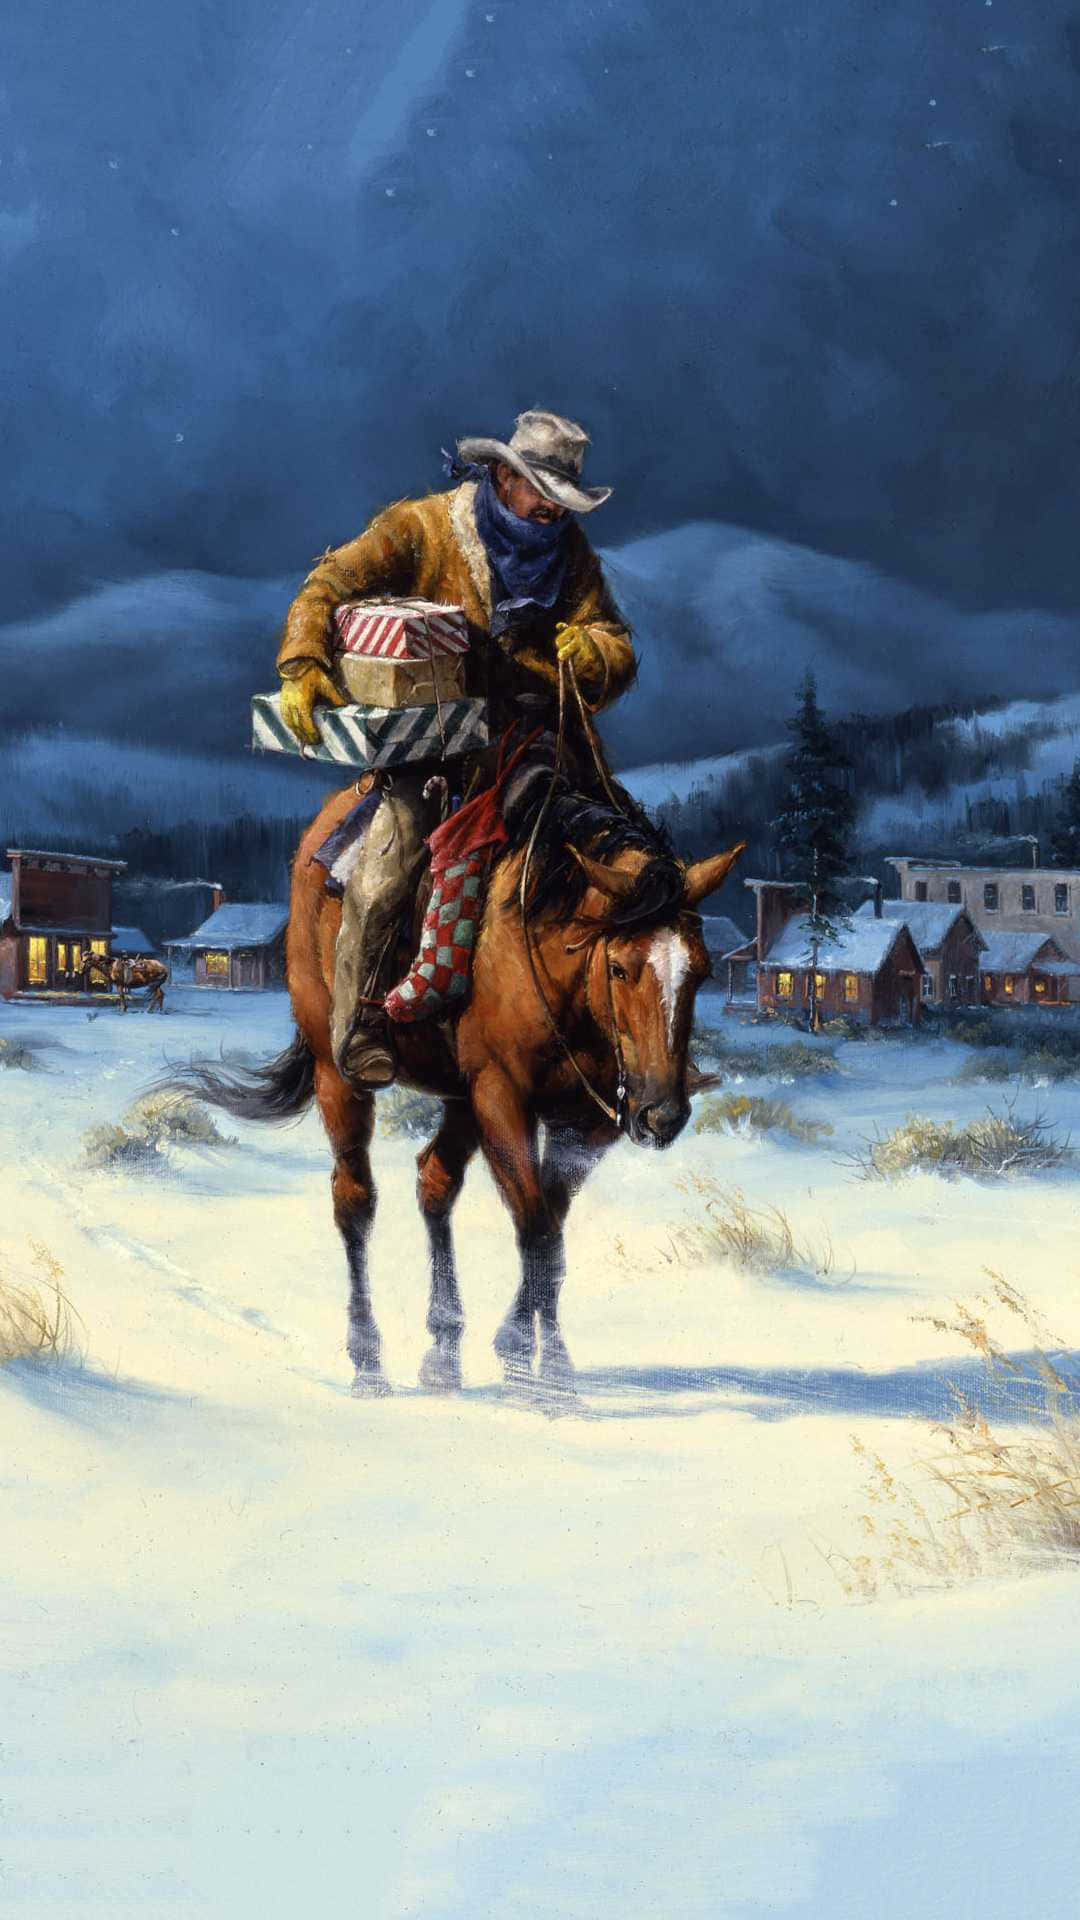 Celebrating Cowboy Christmas in the Wild West! Wallpaper